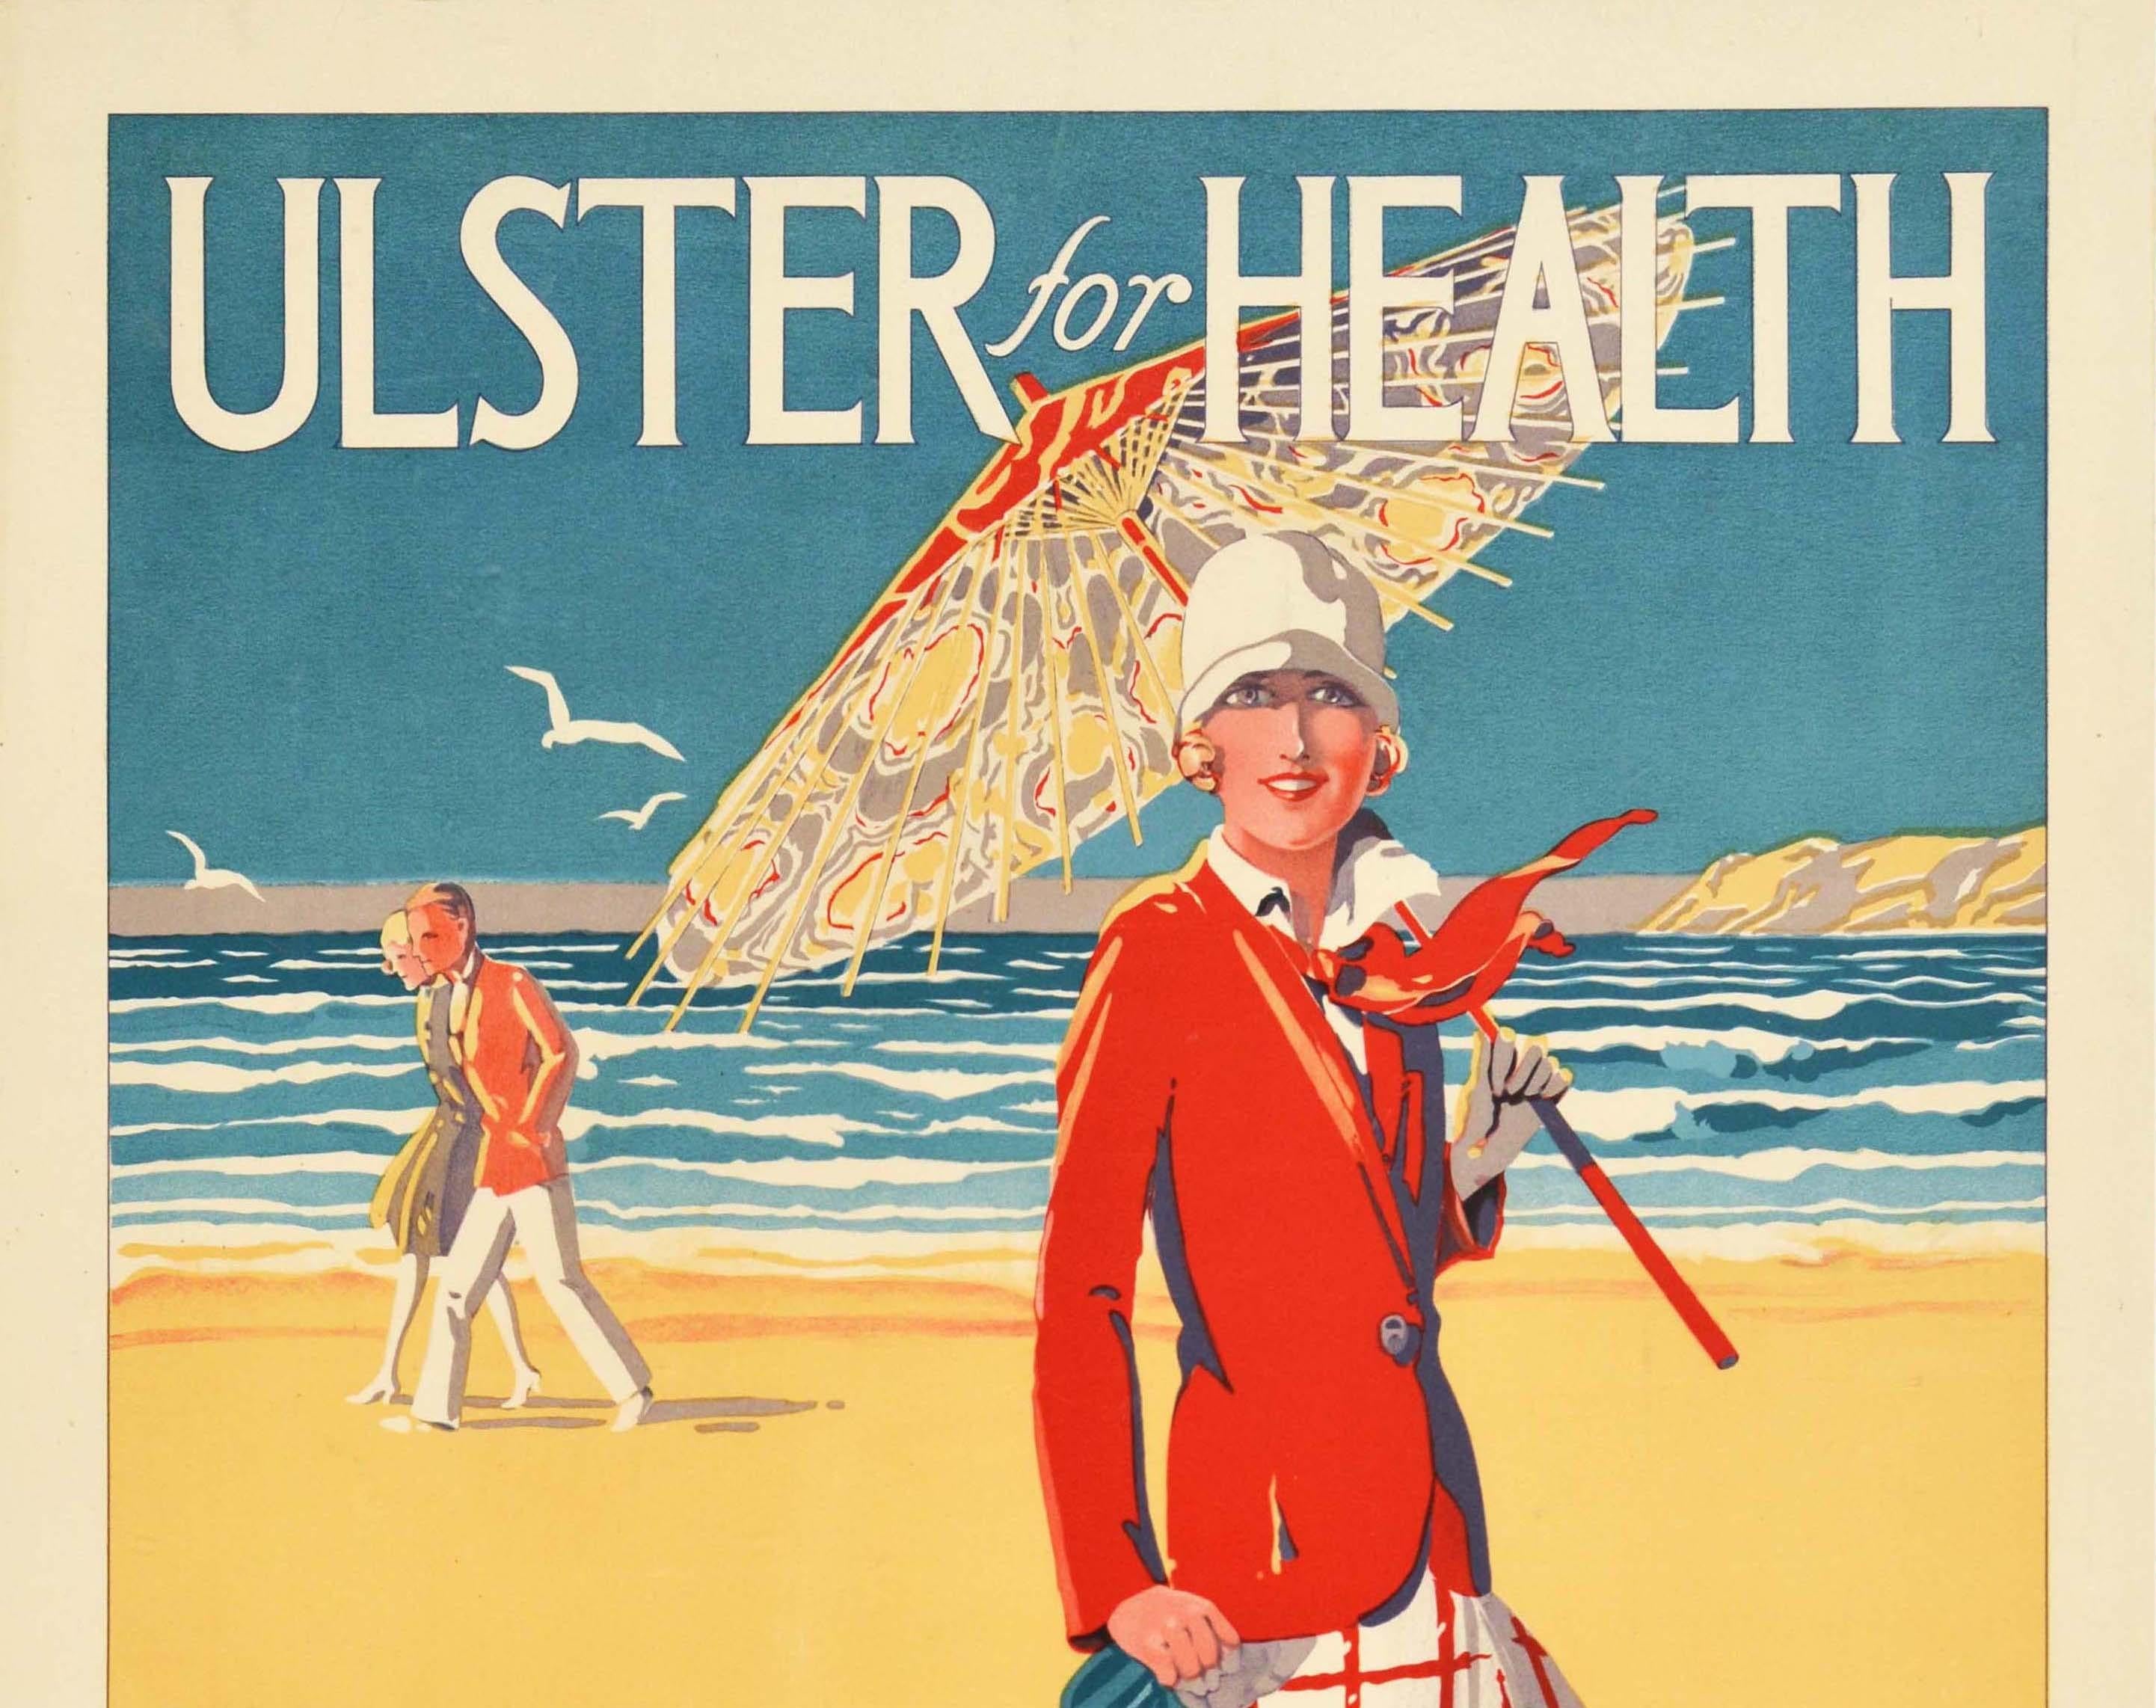 Original vintage travel poster - Ulster for health - featuring a colourful image of a fashionably dressed young lady holding a sun umbrella and smiling to the viewer as she walks along a sandy beach with a small dog in front of a couple walking near